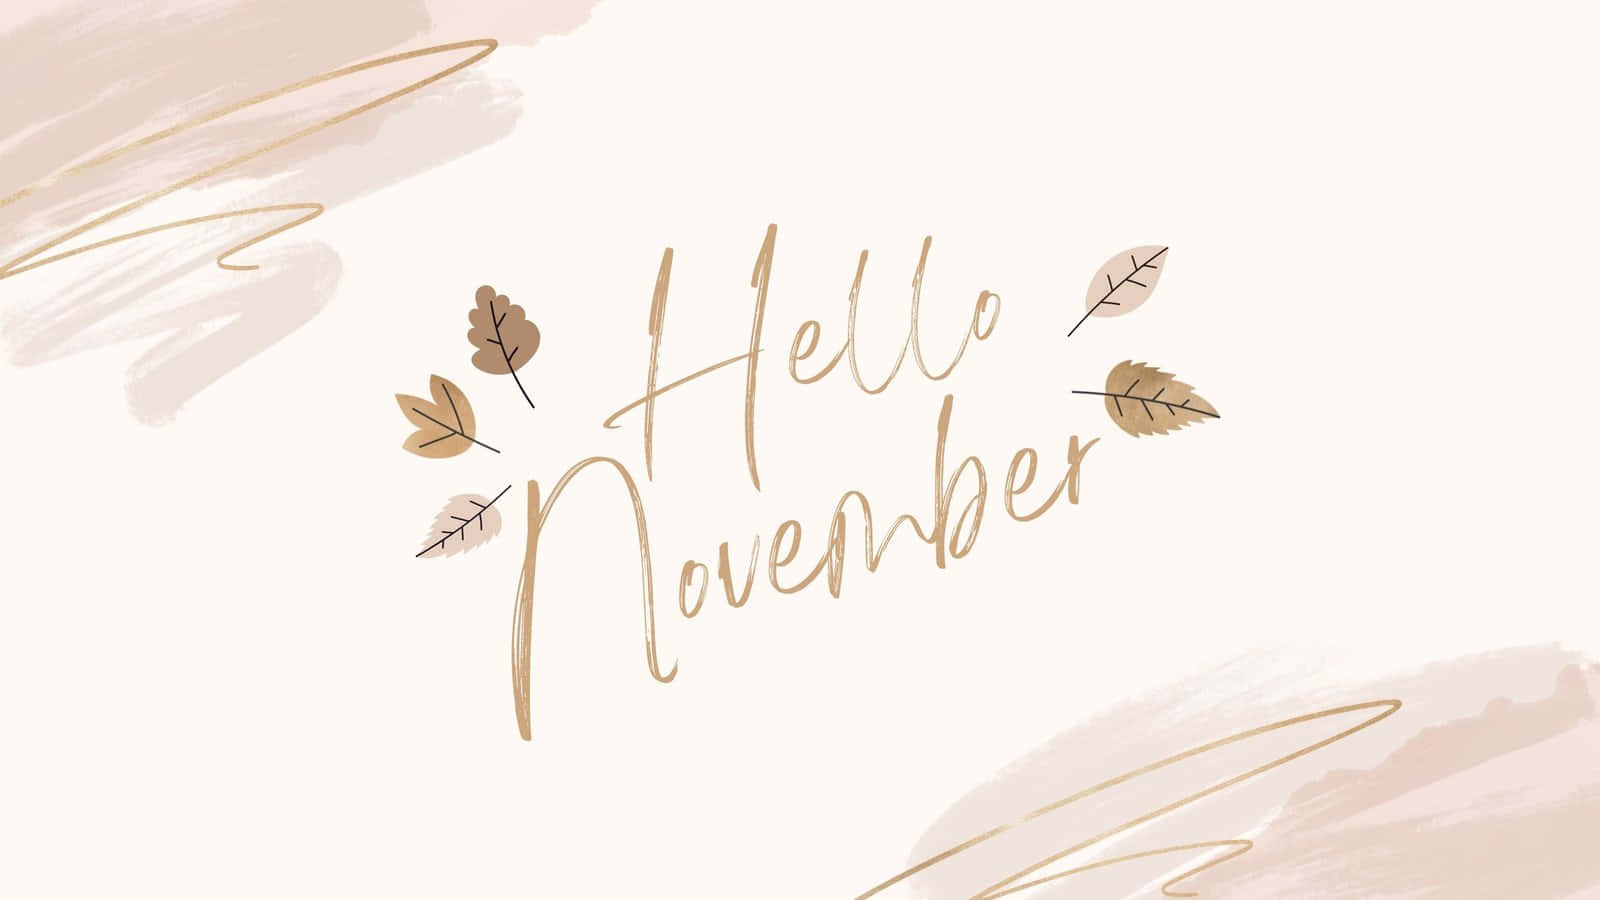  aesthetic november  android HD Photos  Wallpapers 15 Images   Page 1